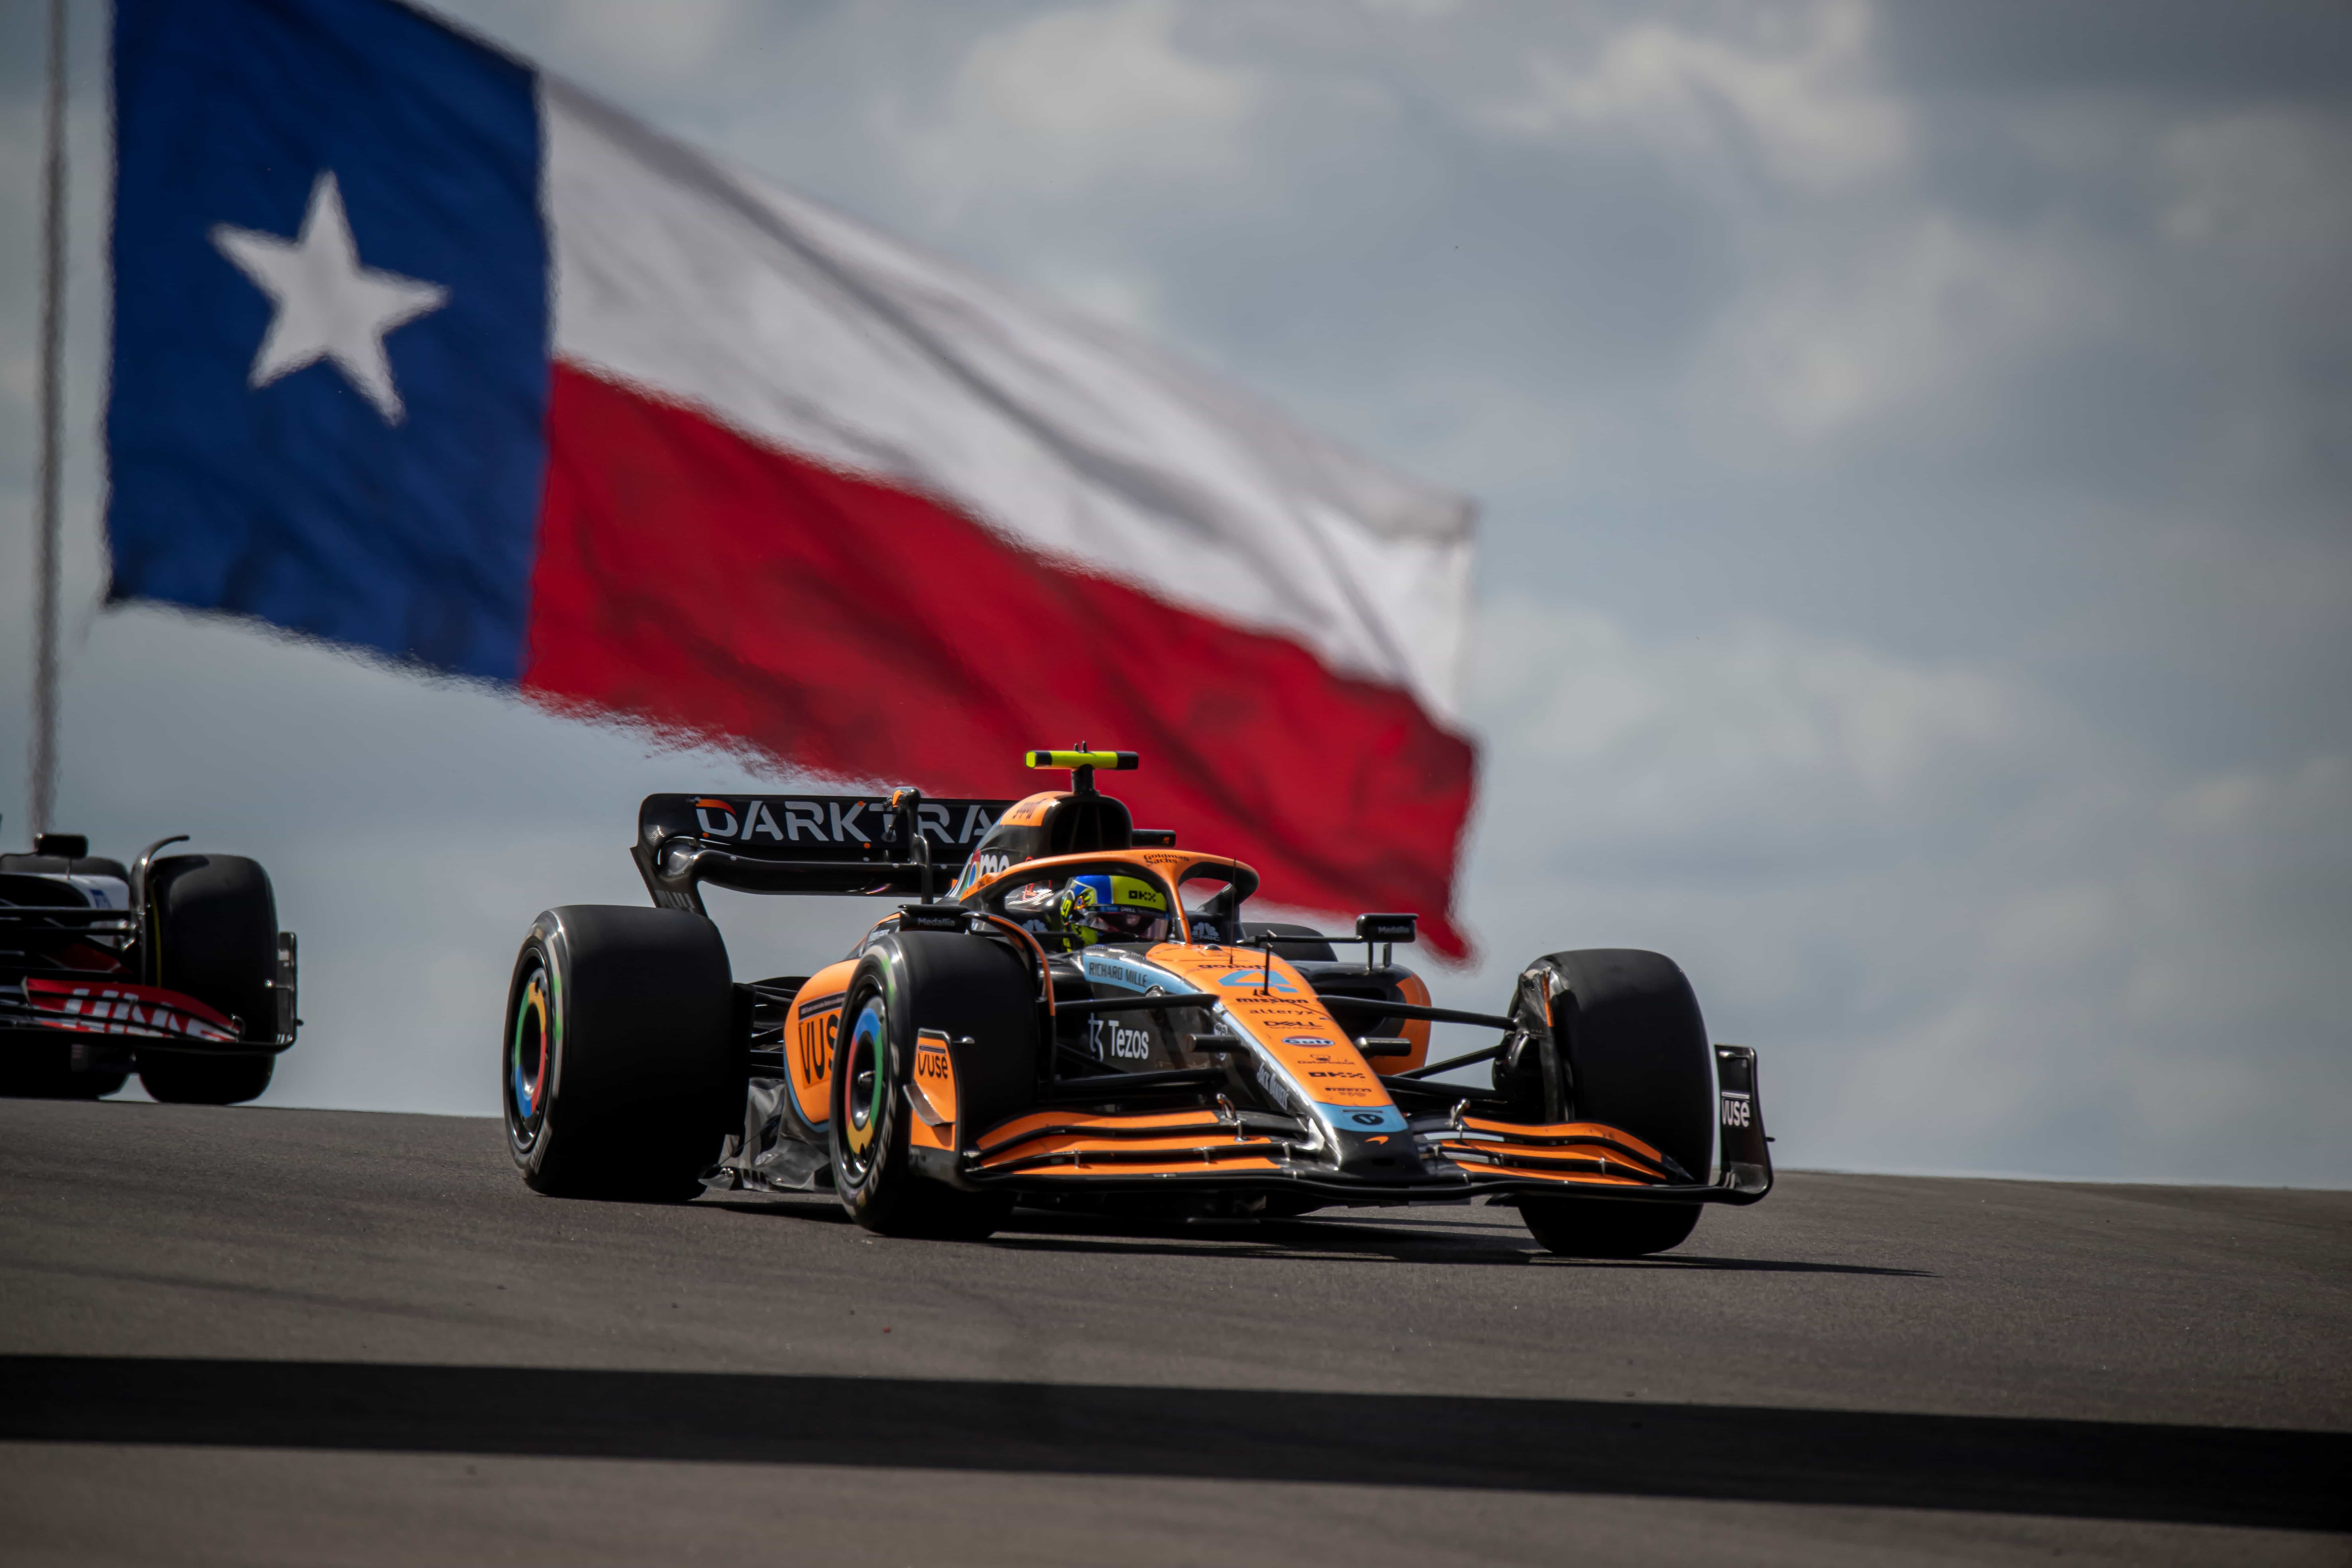 A McLaren F1 car during a race, with a giant Texan flag in the background